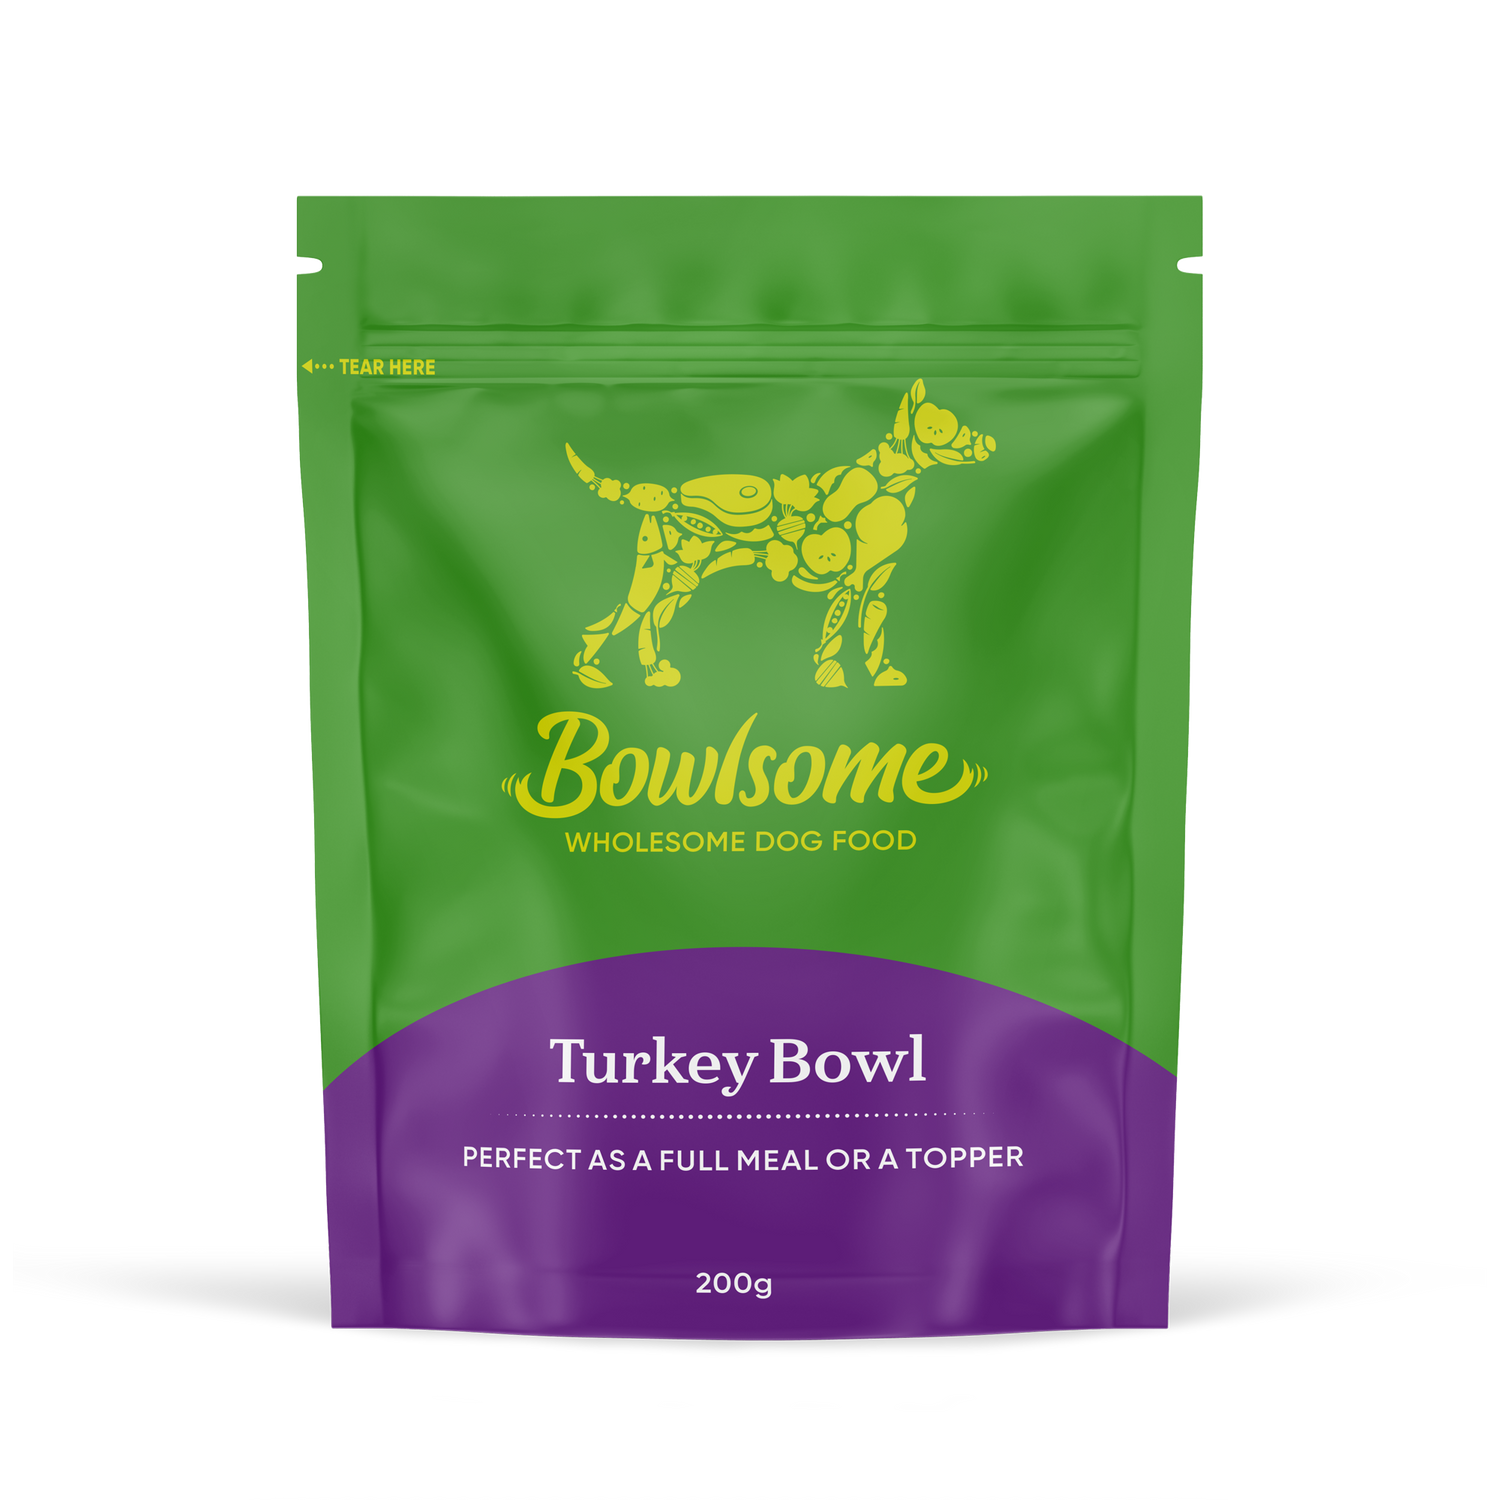 Pouch of dog food that reads "Bowlsome - Wholesome Dog Food, Turkey Bowl"